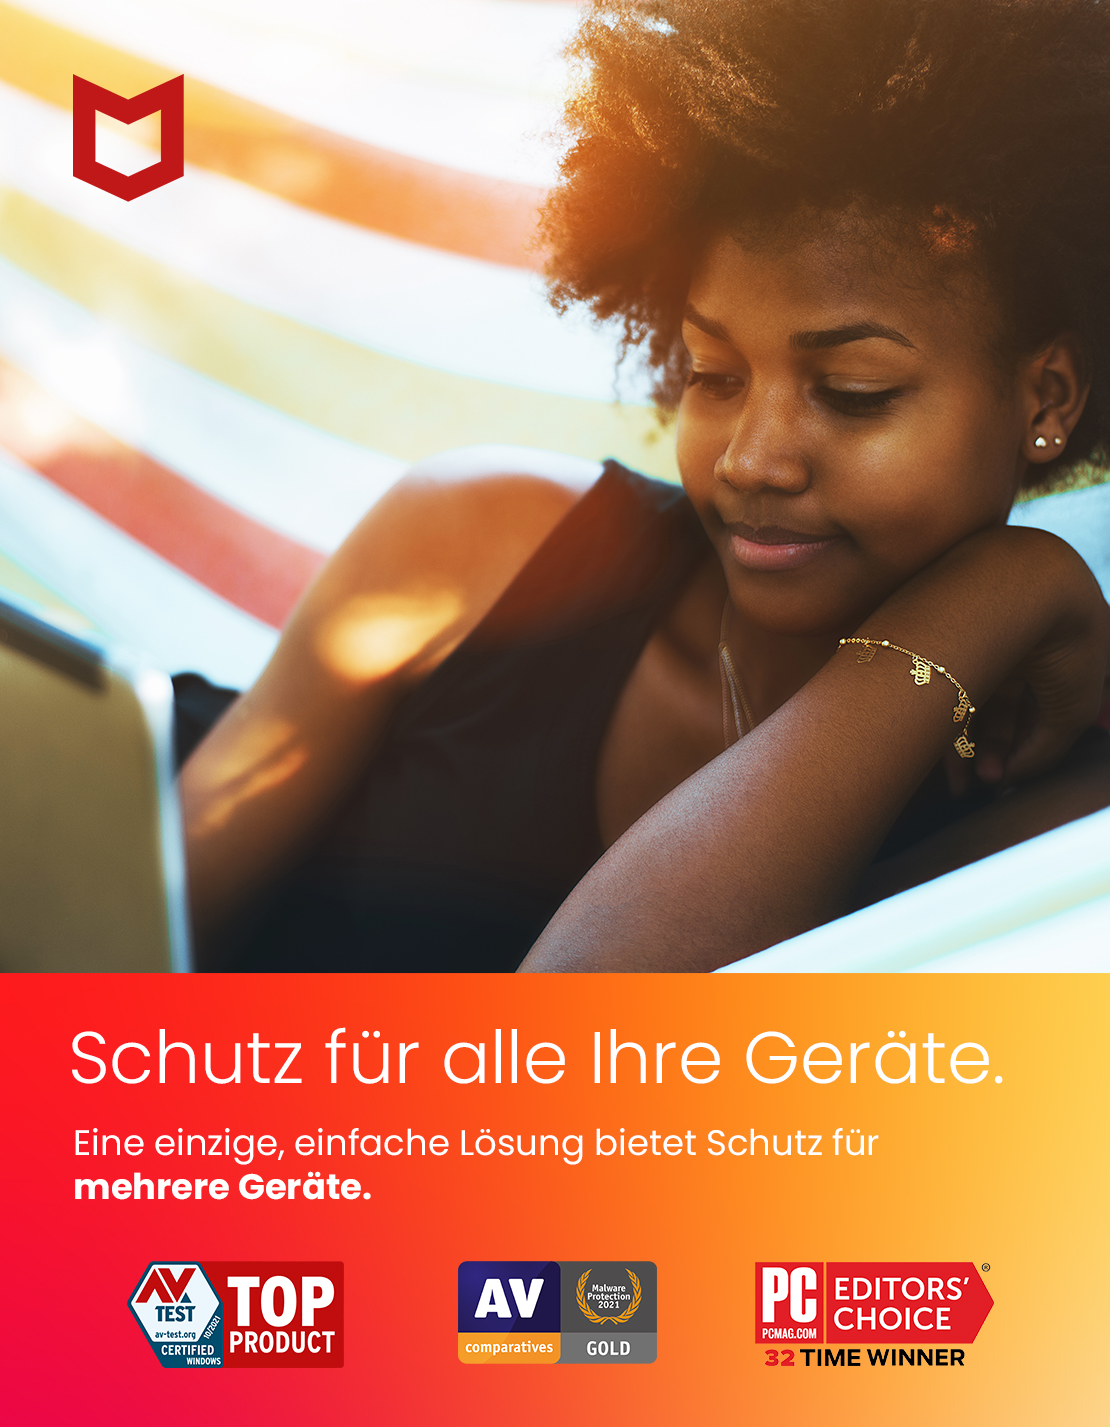 McAfee Total Protection 2024 - 5 Geräte - 2 Jahre inkl. VPN / ESD